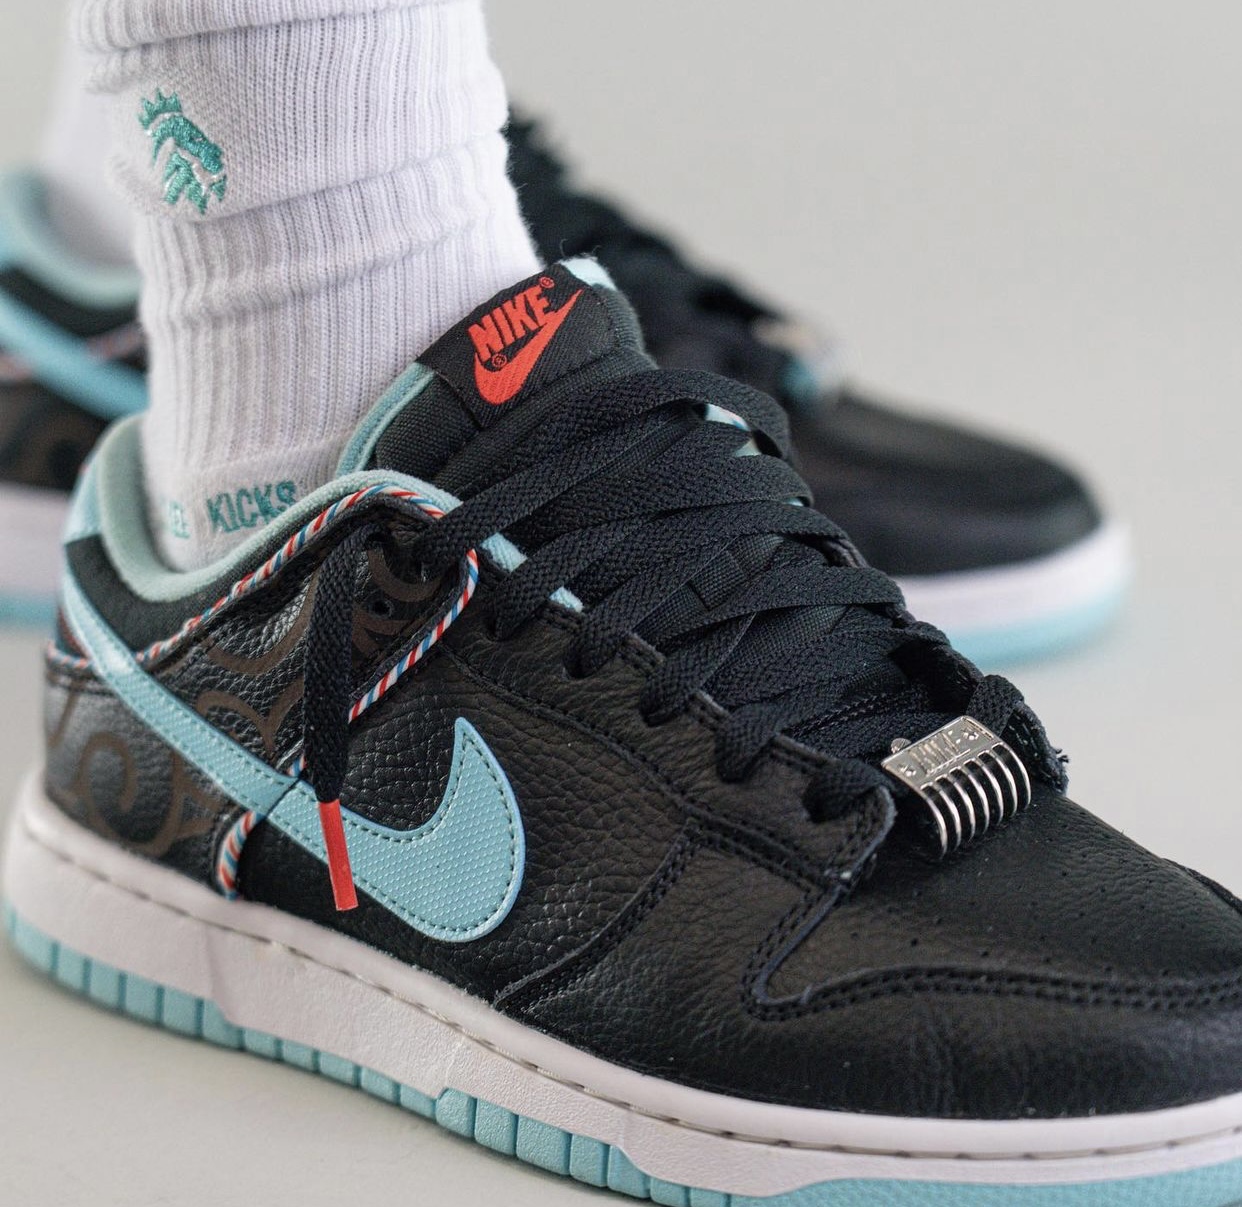 Nike Dunk Low Barber Shop DH7614-001 Release Date